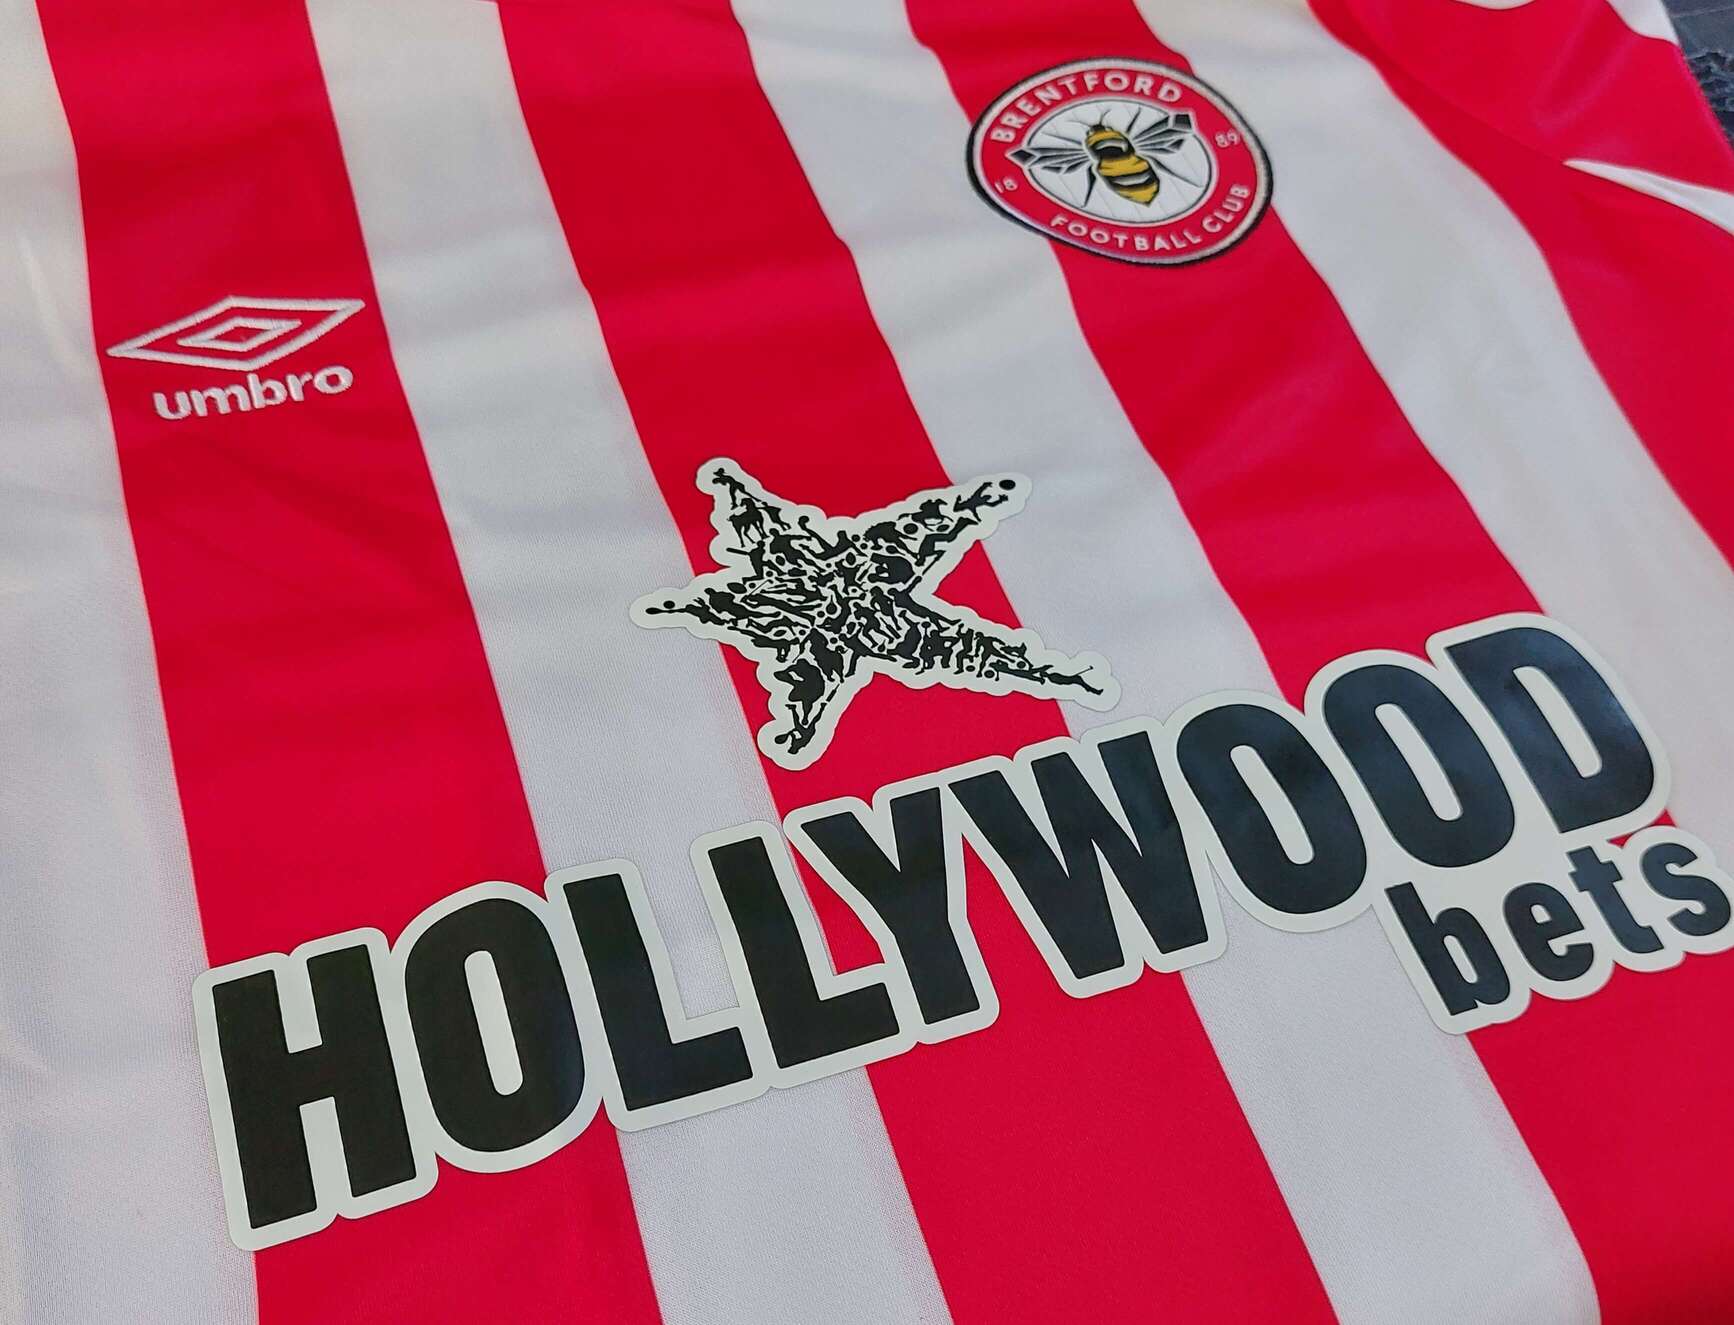 Brentford F.C Jersey Giveaway Competition